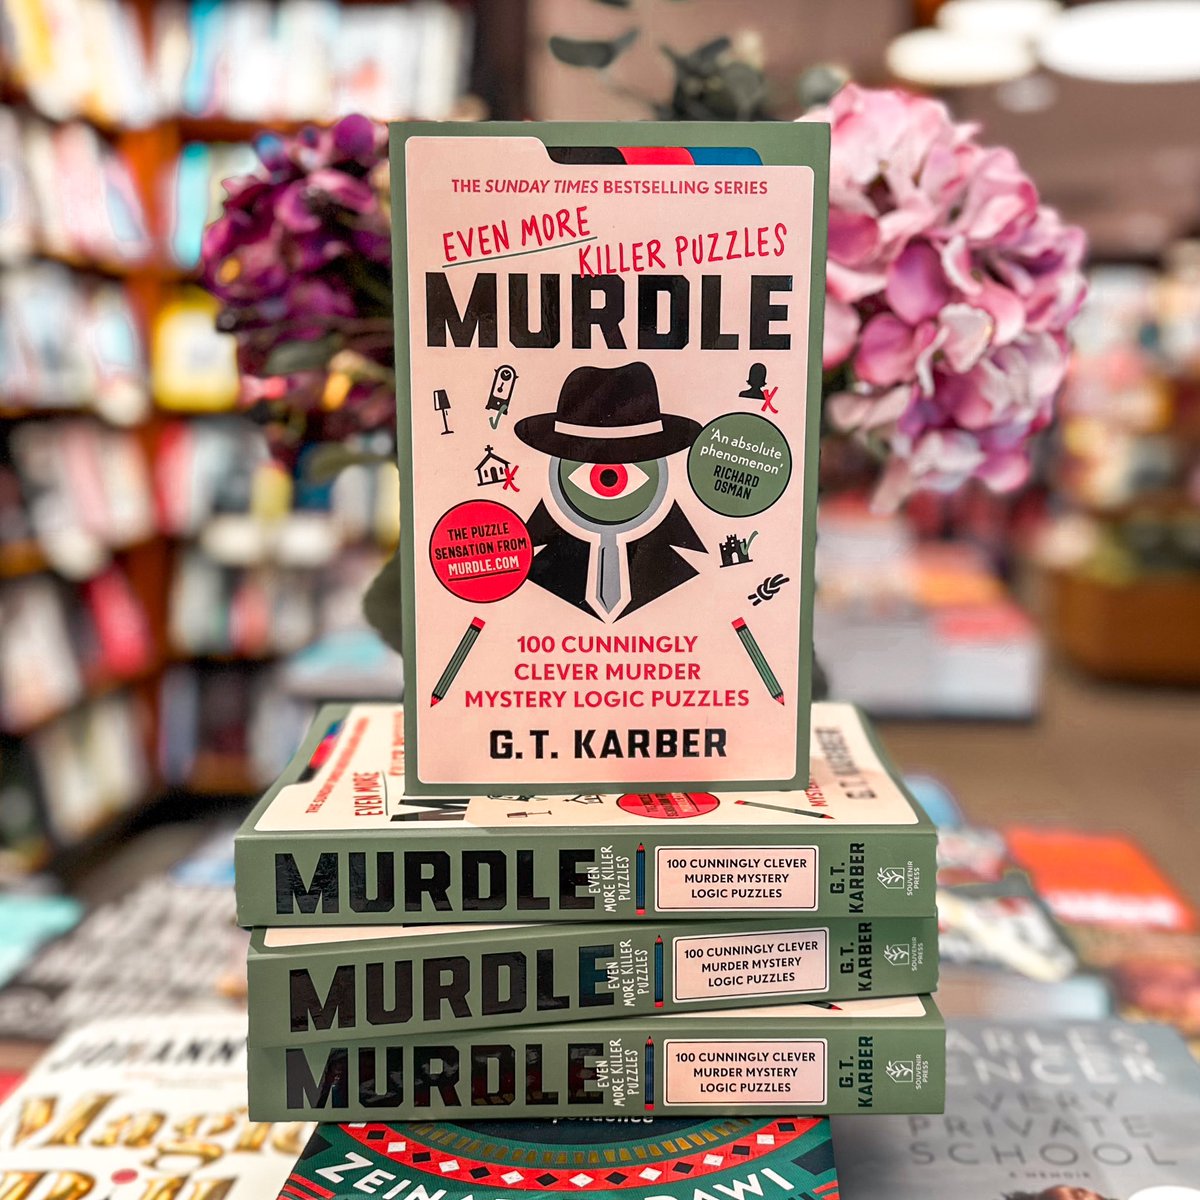 Murdle is back with Even More Killer Puzzles! 🔍

#bookstagram #waterstonesnorthallerton #northallerton #bookshop #lovenorthallerton #waterstones #murdle